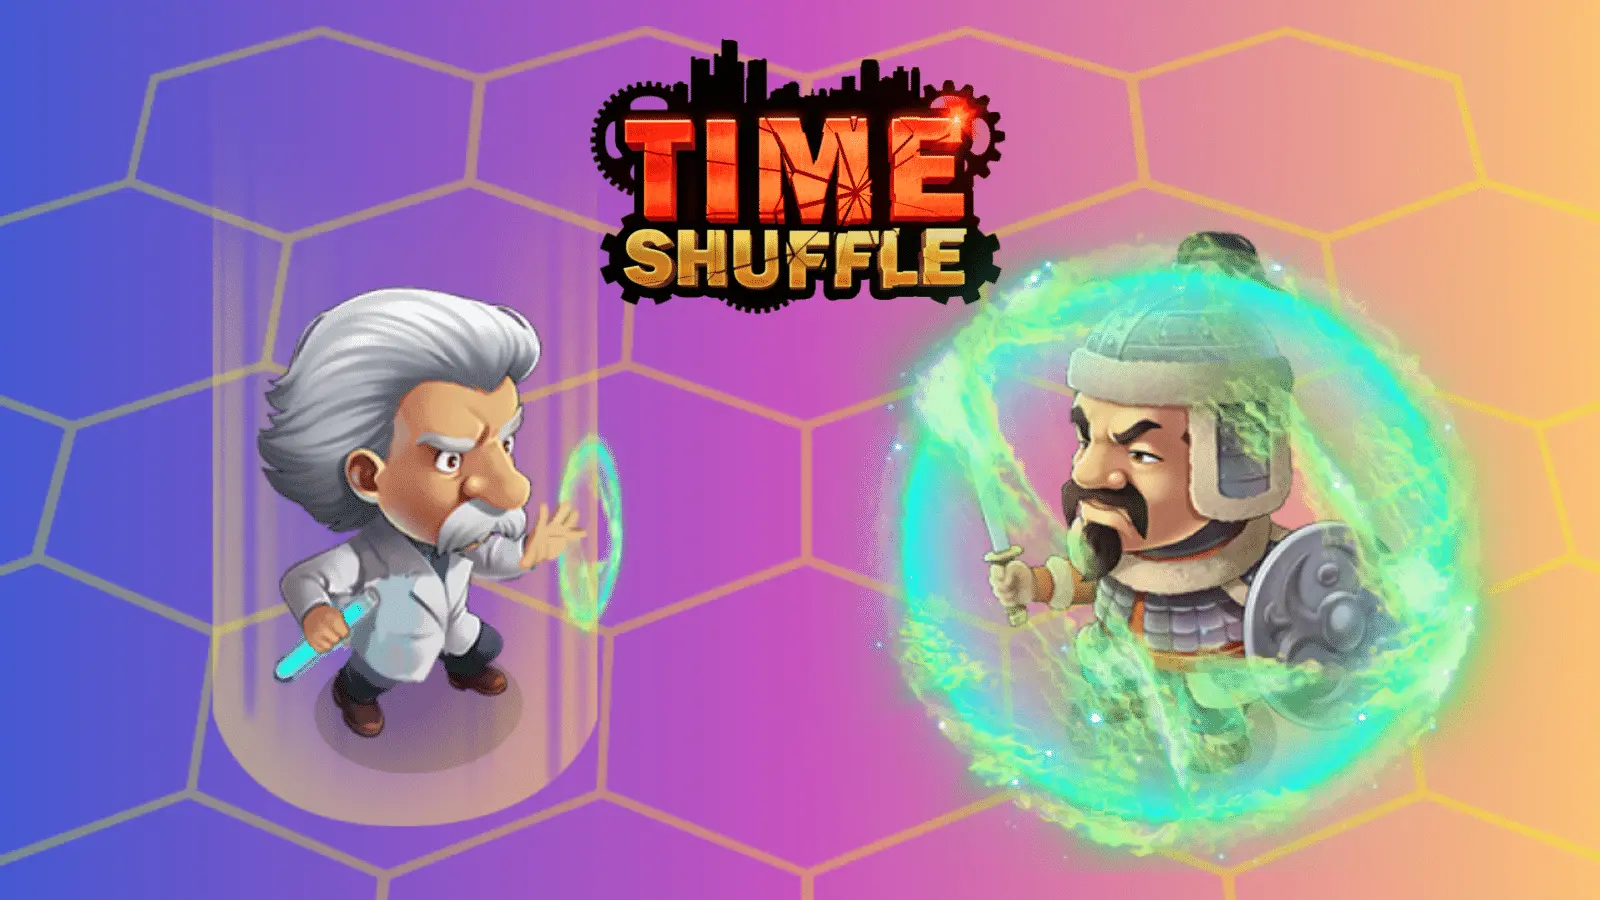 Time Shuffle Game is a turn-based RPG on the Avalanche, immersing players in a multidimensional time-traveling universe where heroes battle.